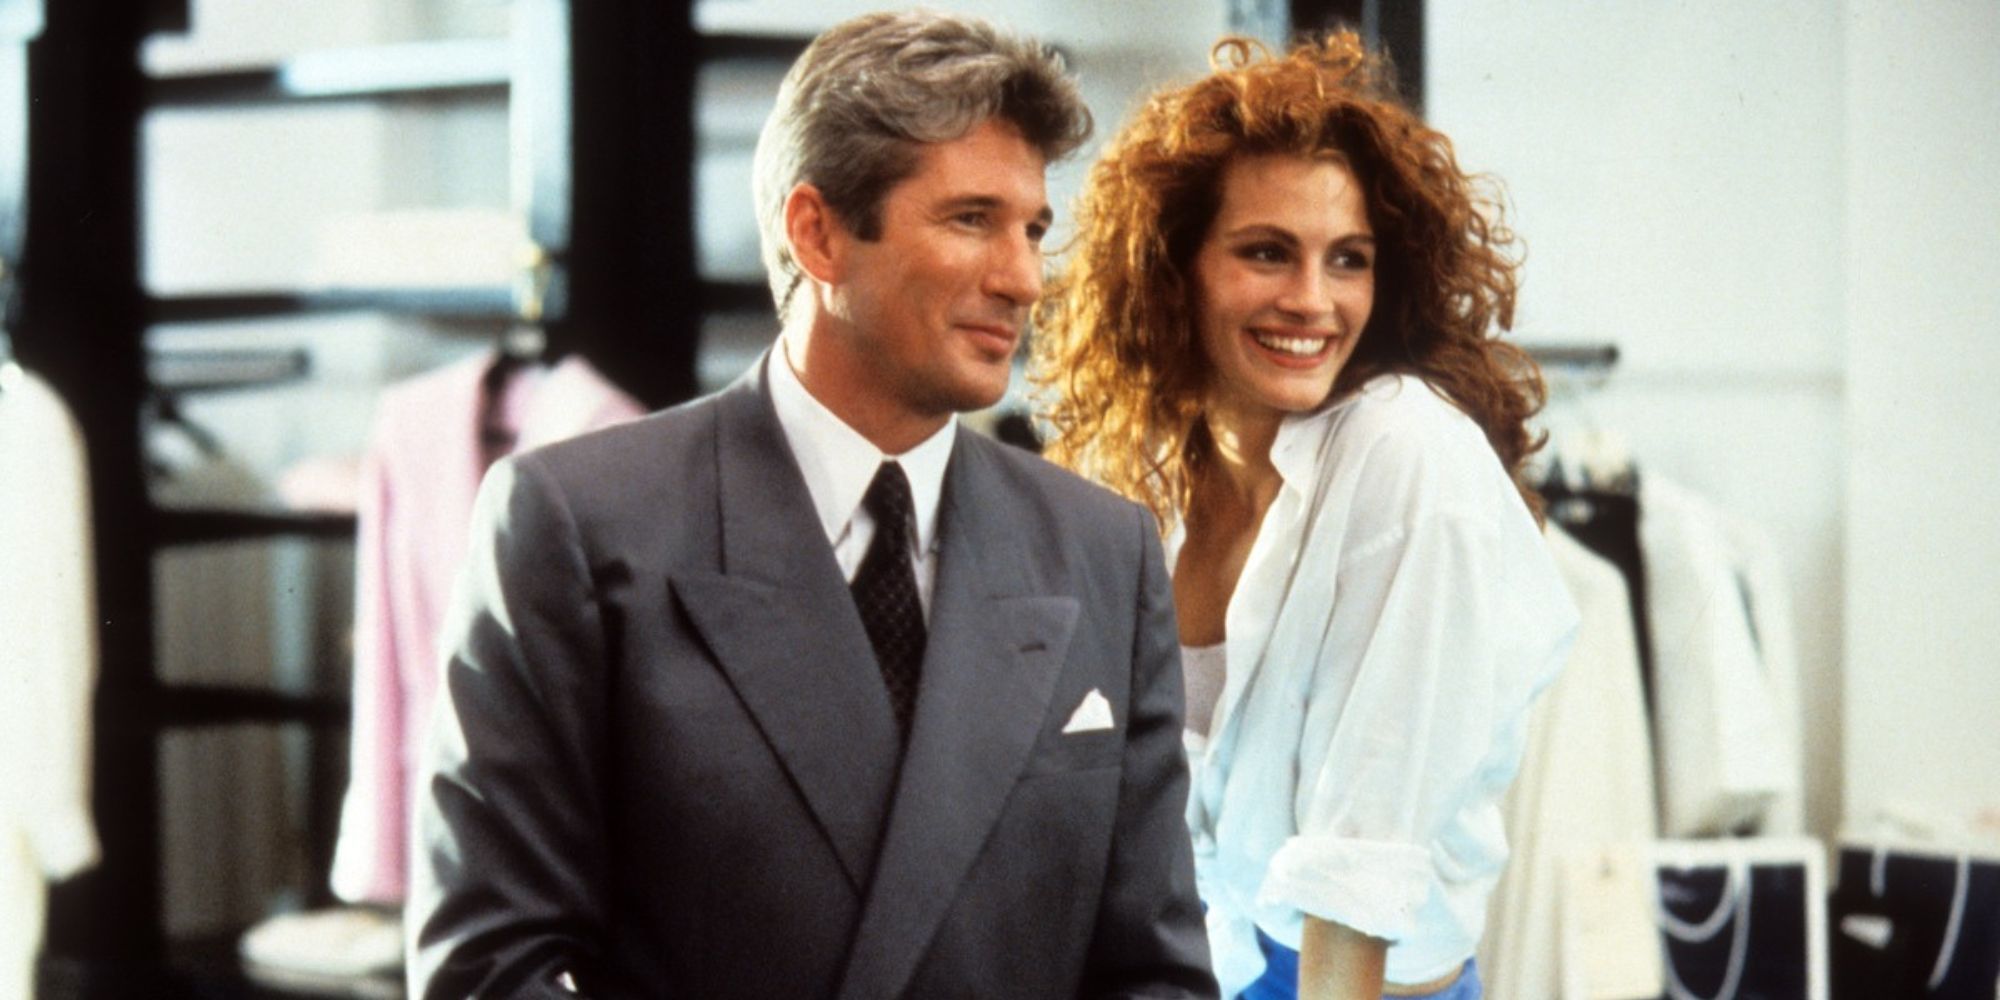 Edward and Vivian from Pretty Woman stand together